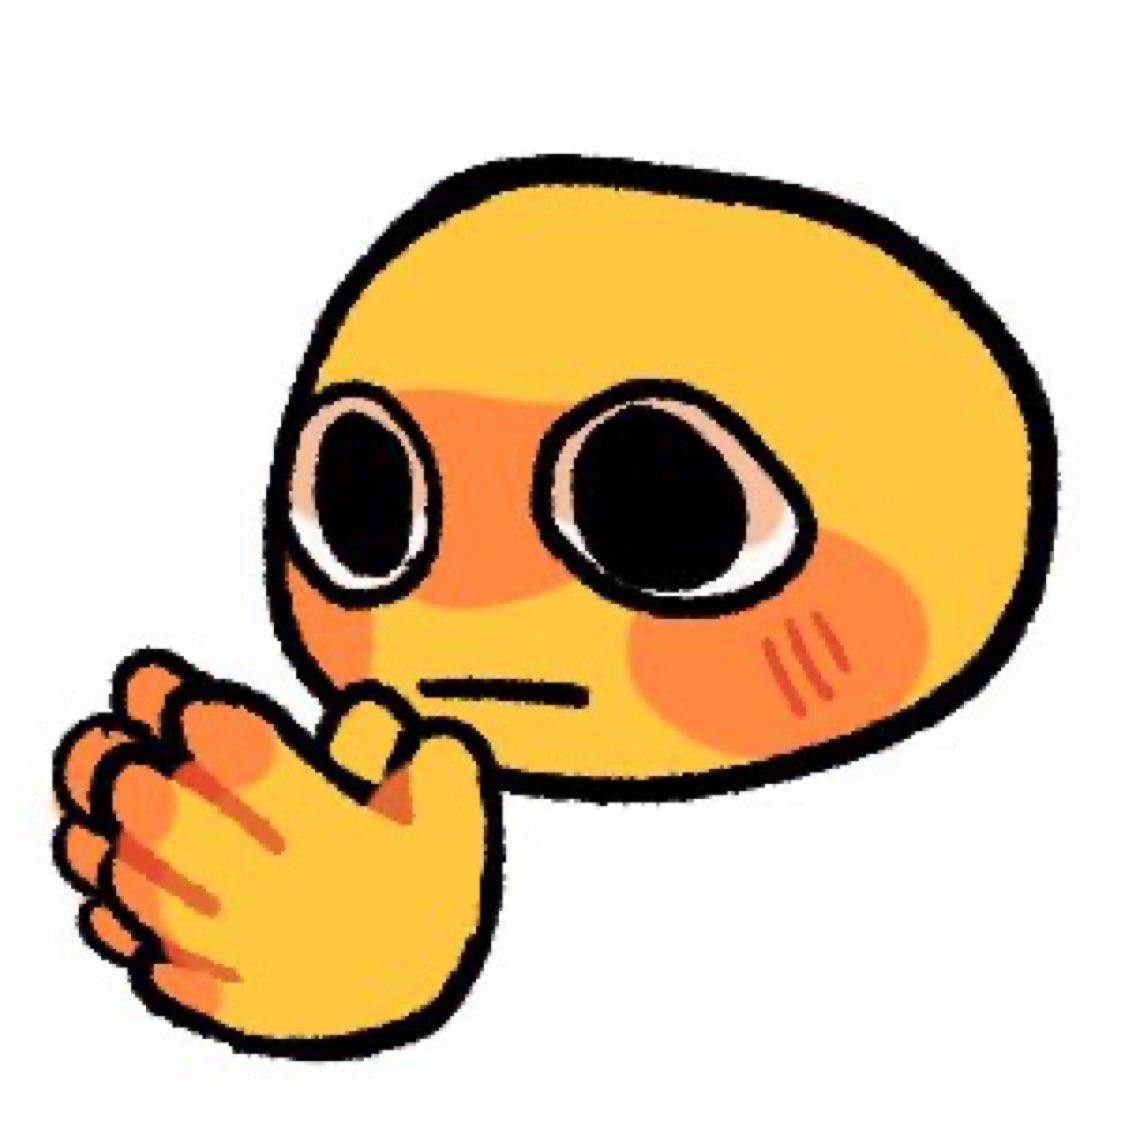 Dear Vtuber hand asset makers - Please make them lemon compatible I beg of you they’re so cool and I really wanna use them BUT I CANT WAHH 🥺 [ #VTuberAssets | #VtuberSupport ]